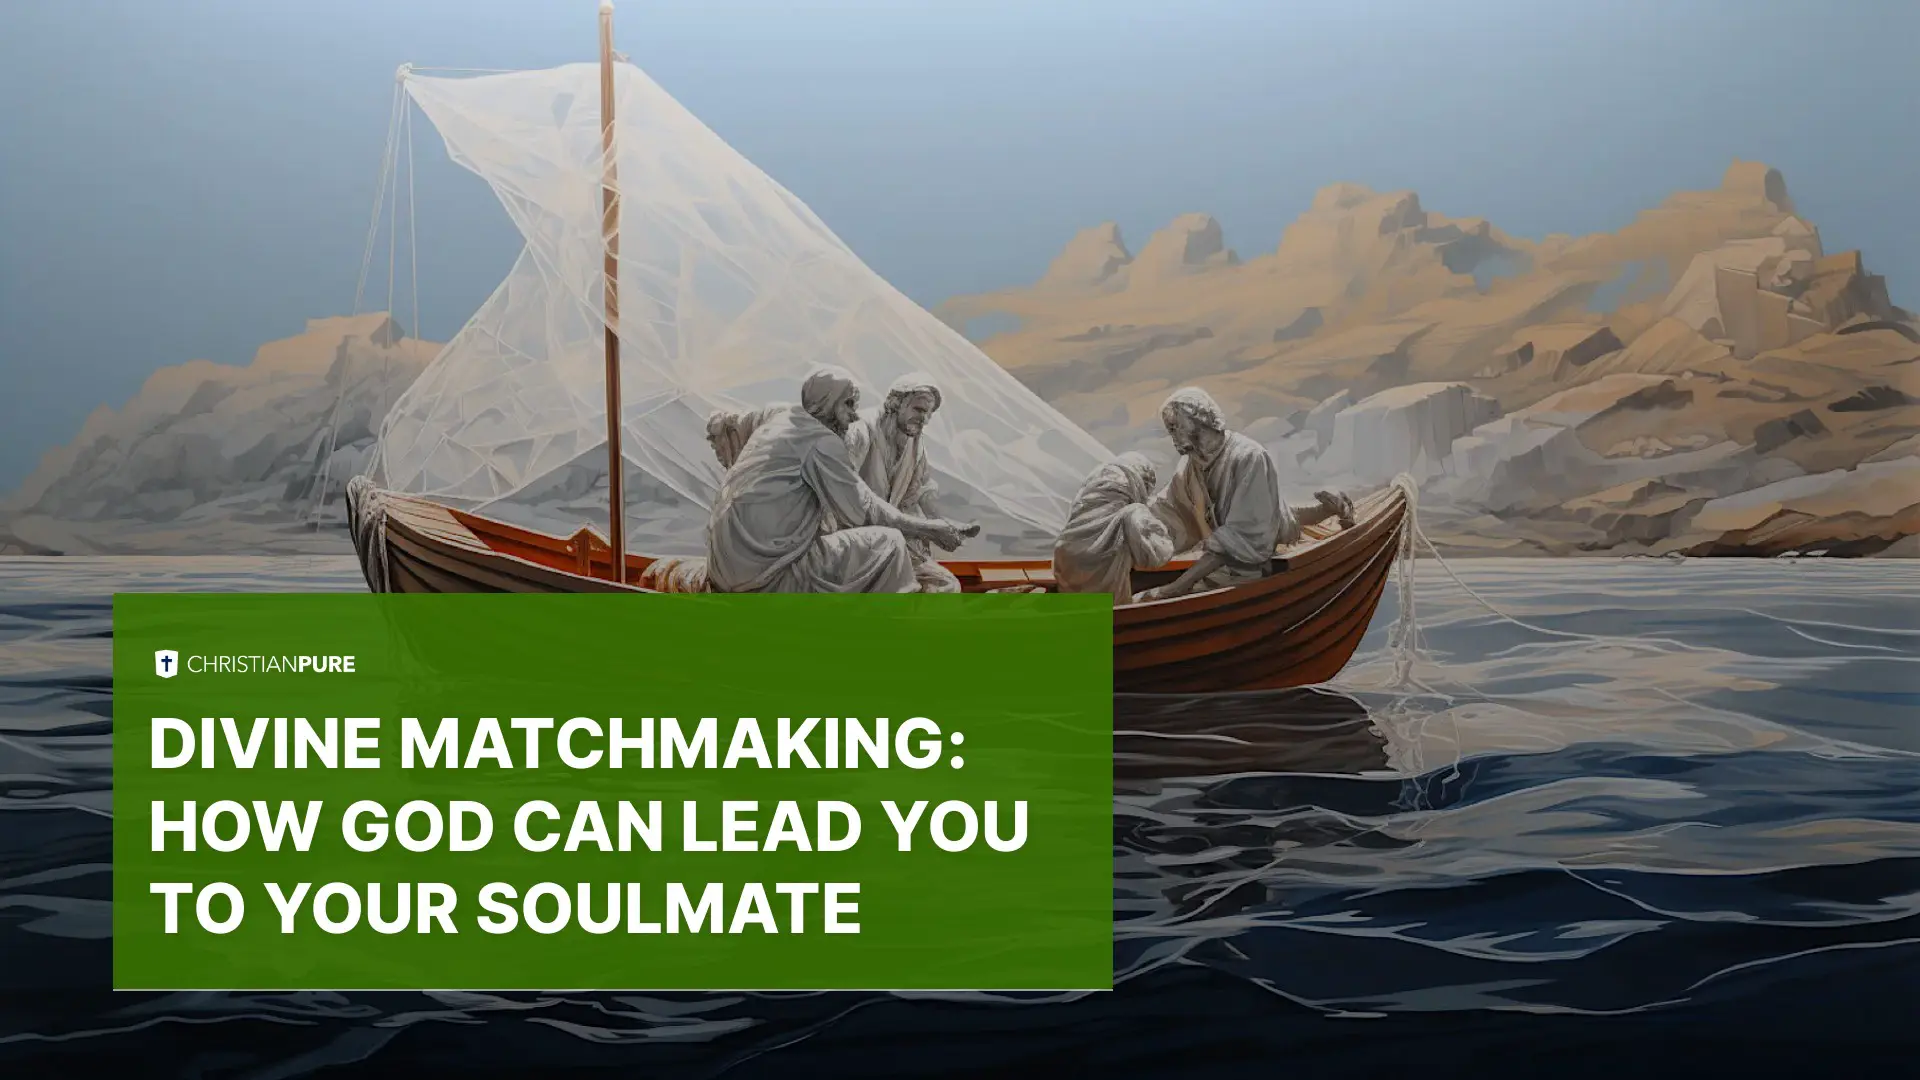 Does God Lead You to Your Soulmate